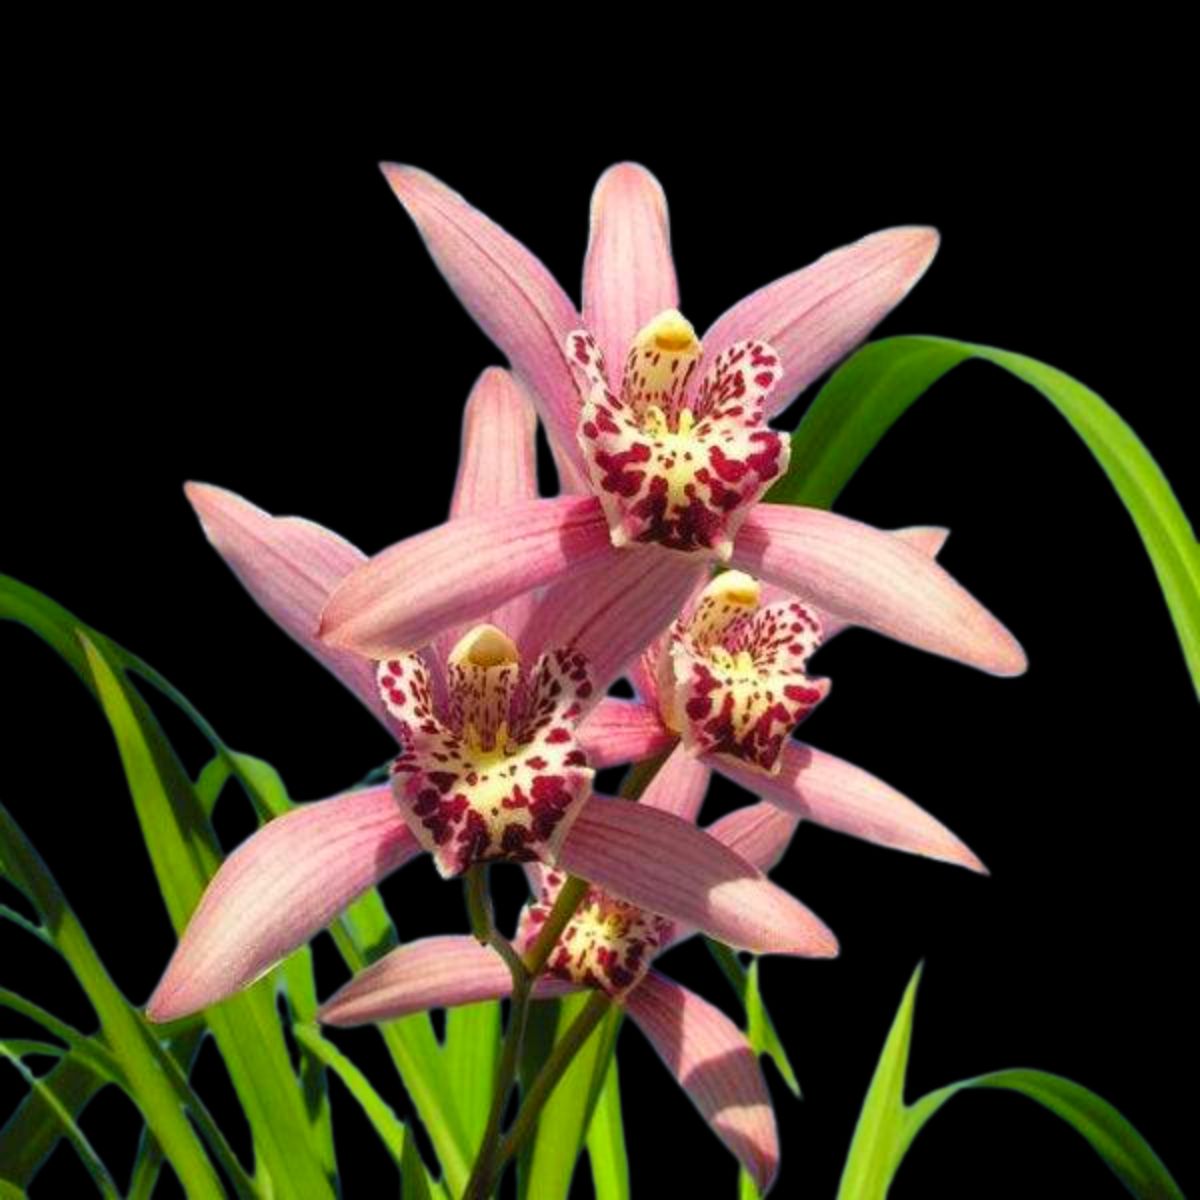 The Cymbidium Miss Taipei Unveiled orchid flower is a captivating sight to behold. Its petals are typically a combination of soft pastel colors and vibrant hues, creating a stunning visual display. The flower has a complex structure, with multiple layers of petals arranged in a symmetrical pattern.